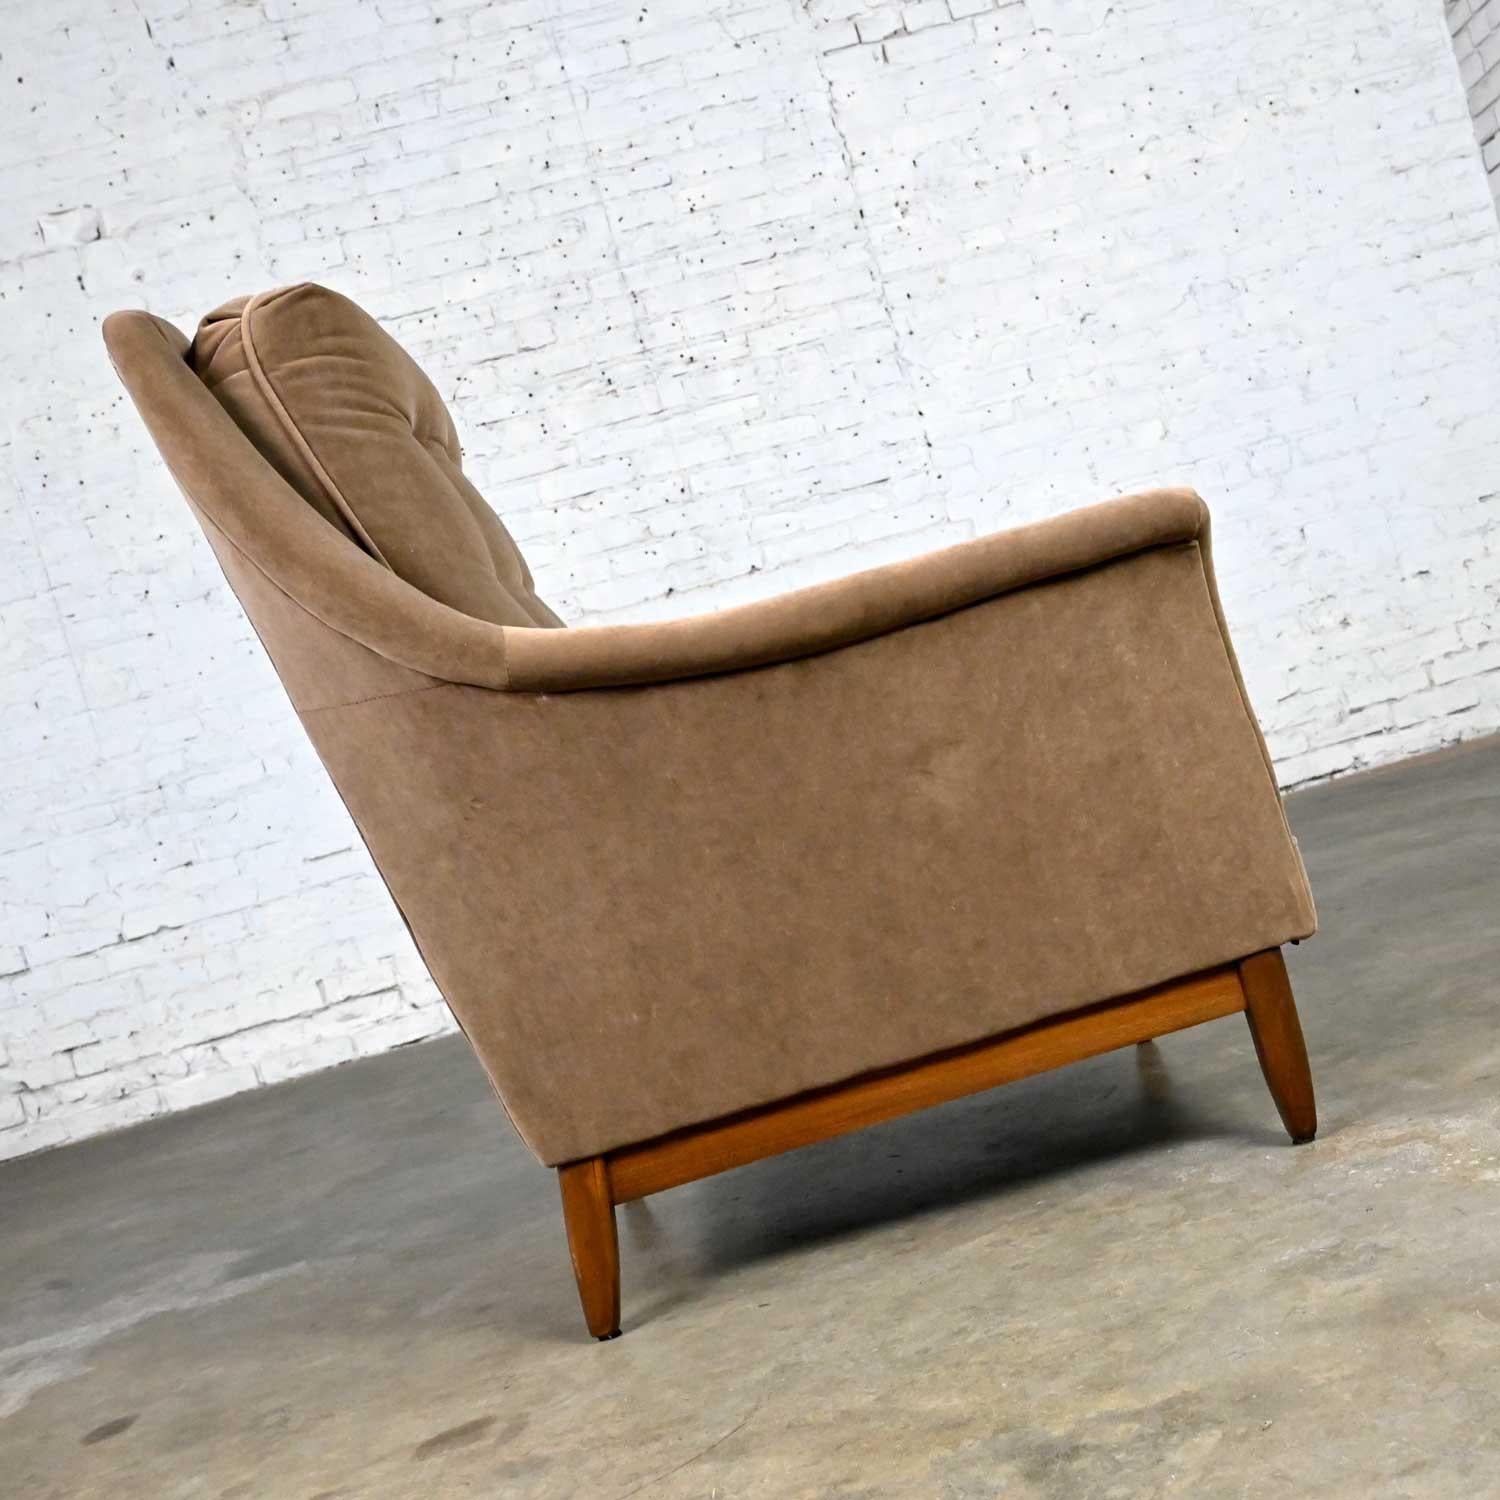 Vintage Mid-Century Modern Mocha Colored Velvet Club Lounge Chair Style Dunbar In Good Condition For Sale In Topeka, KS